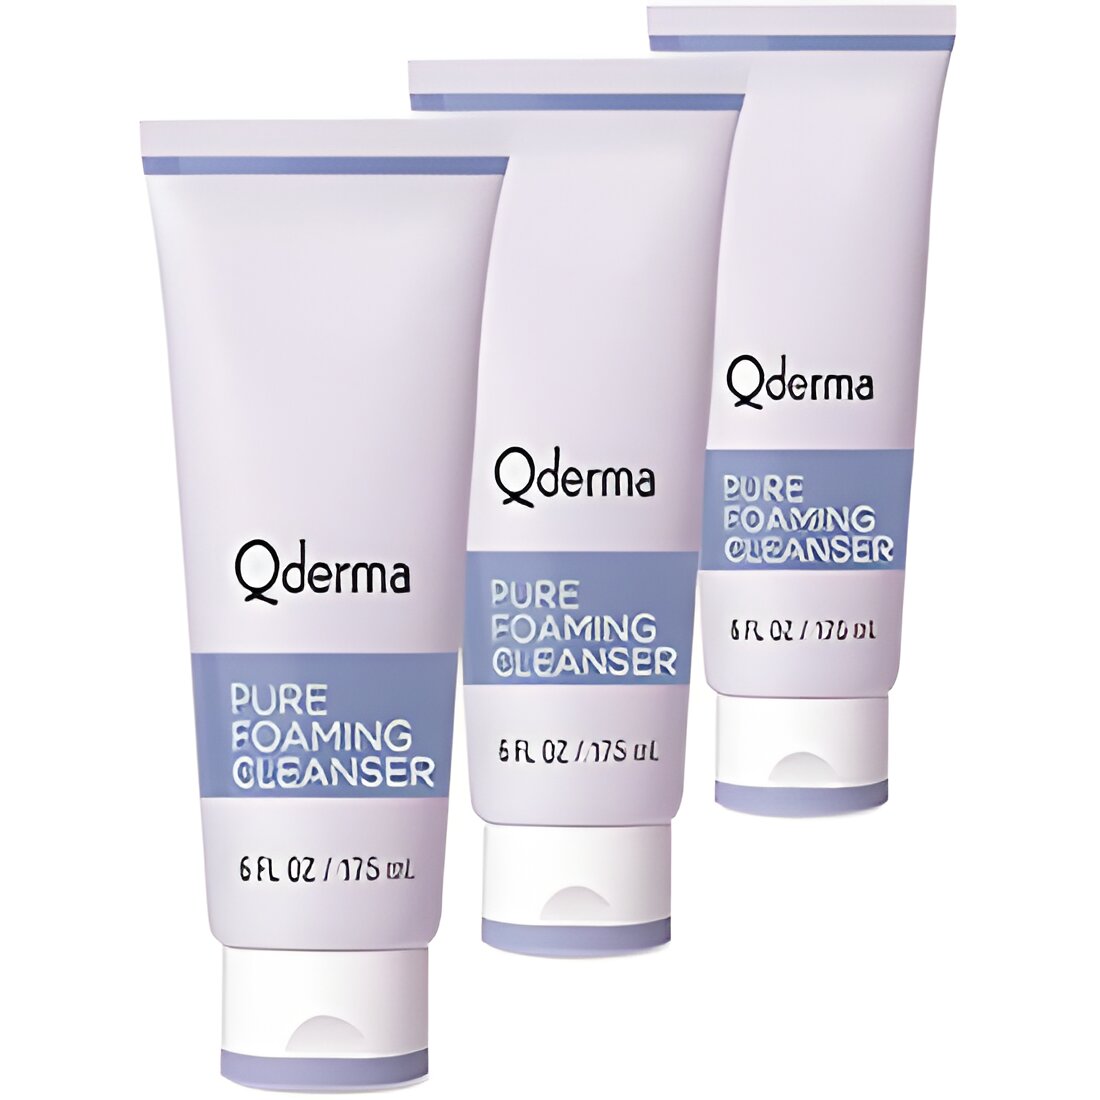 Free Qderma Pure Foaming Cleanser For Product Testers